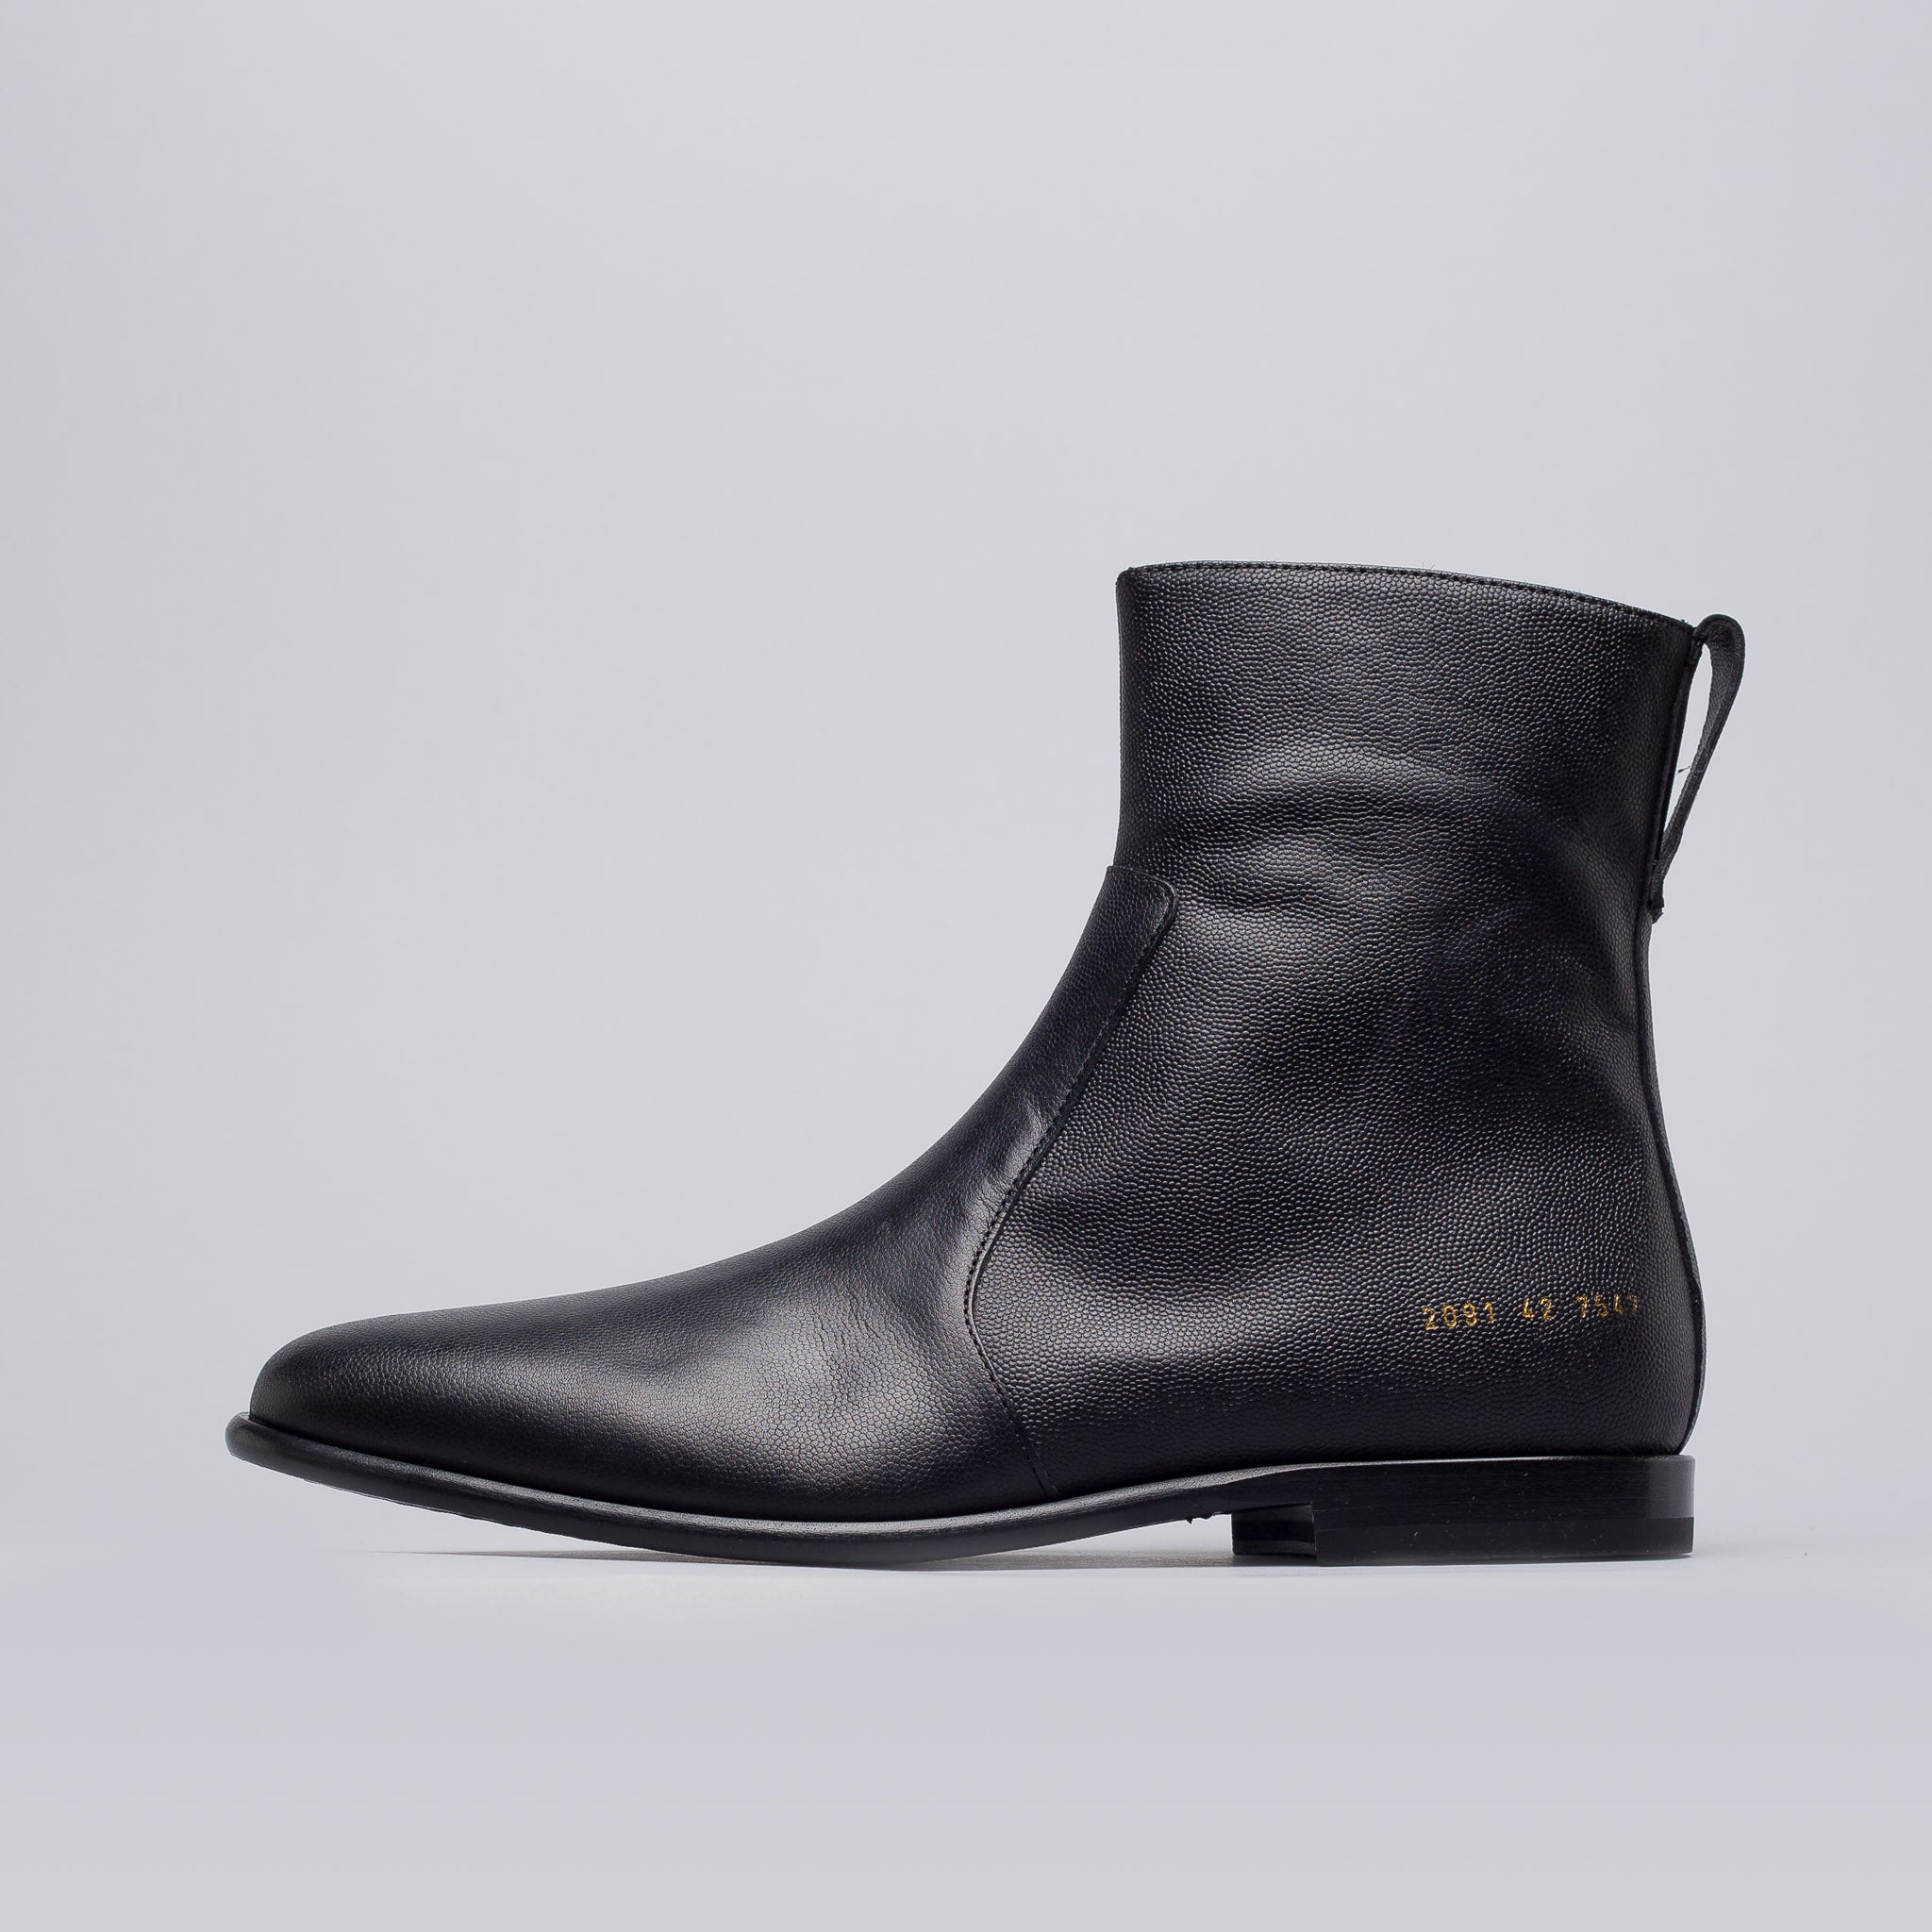 NOTRE-CHICAGO-COMMON-PROJECT-RG-CHELSEA-BOOT-BLACK-2091-2091_2048x2048.jpg